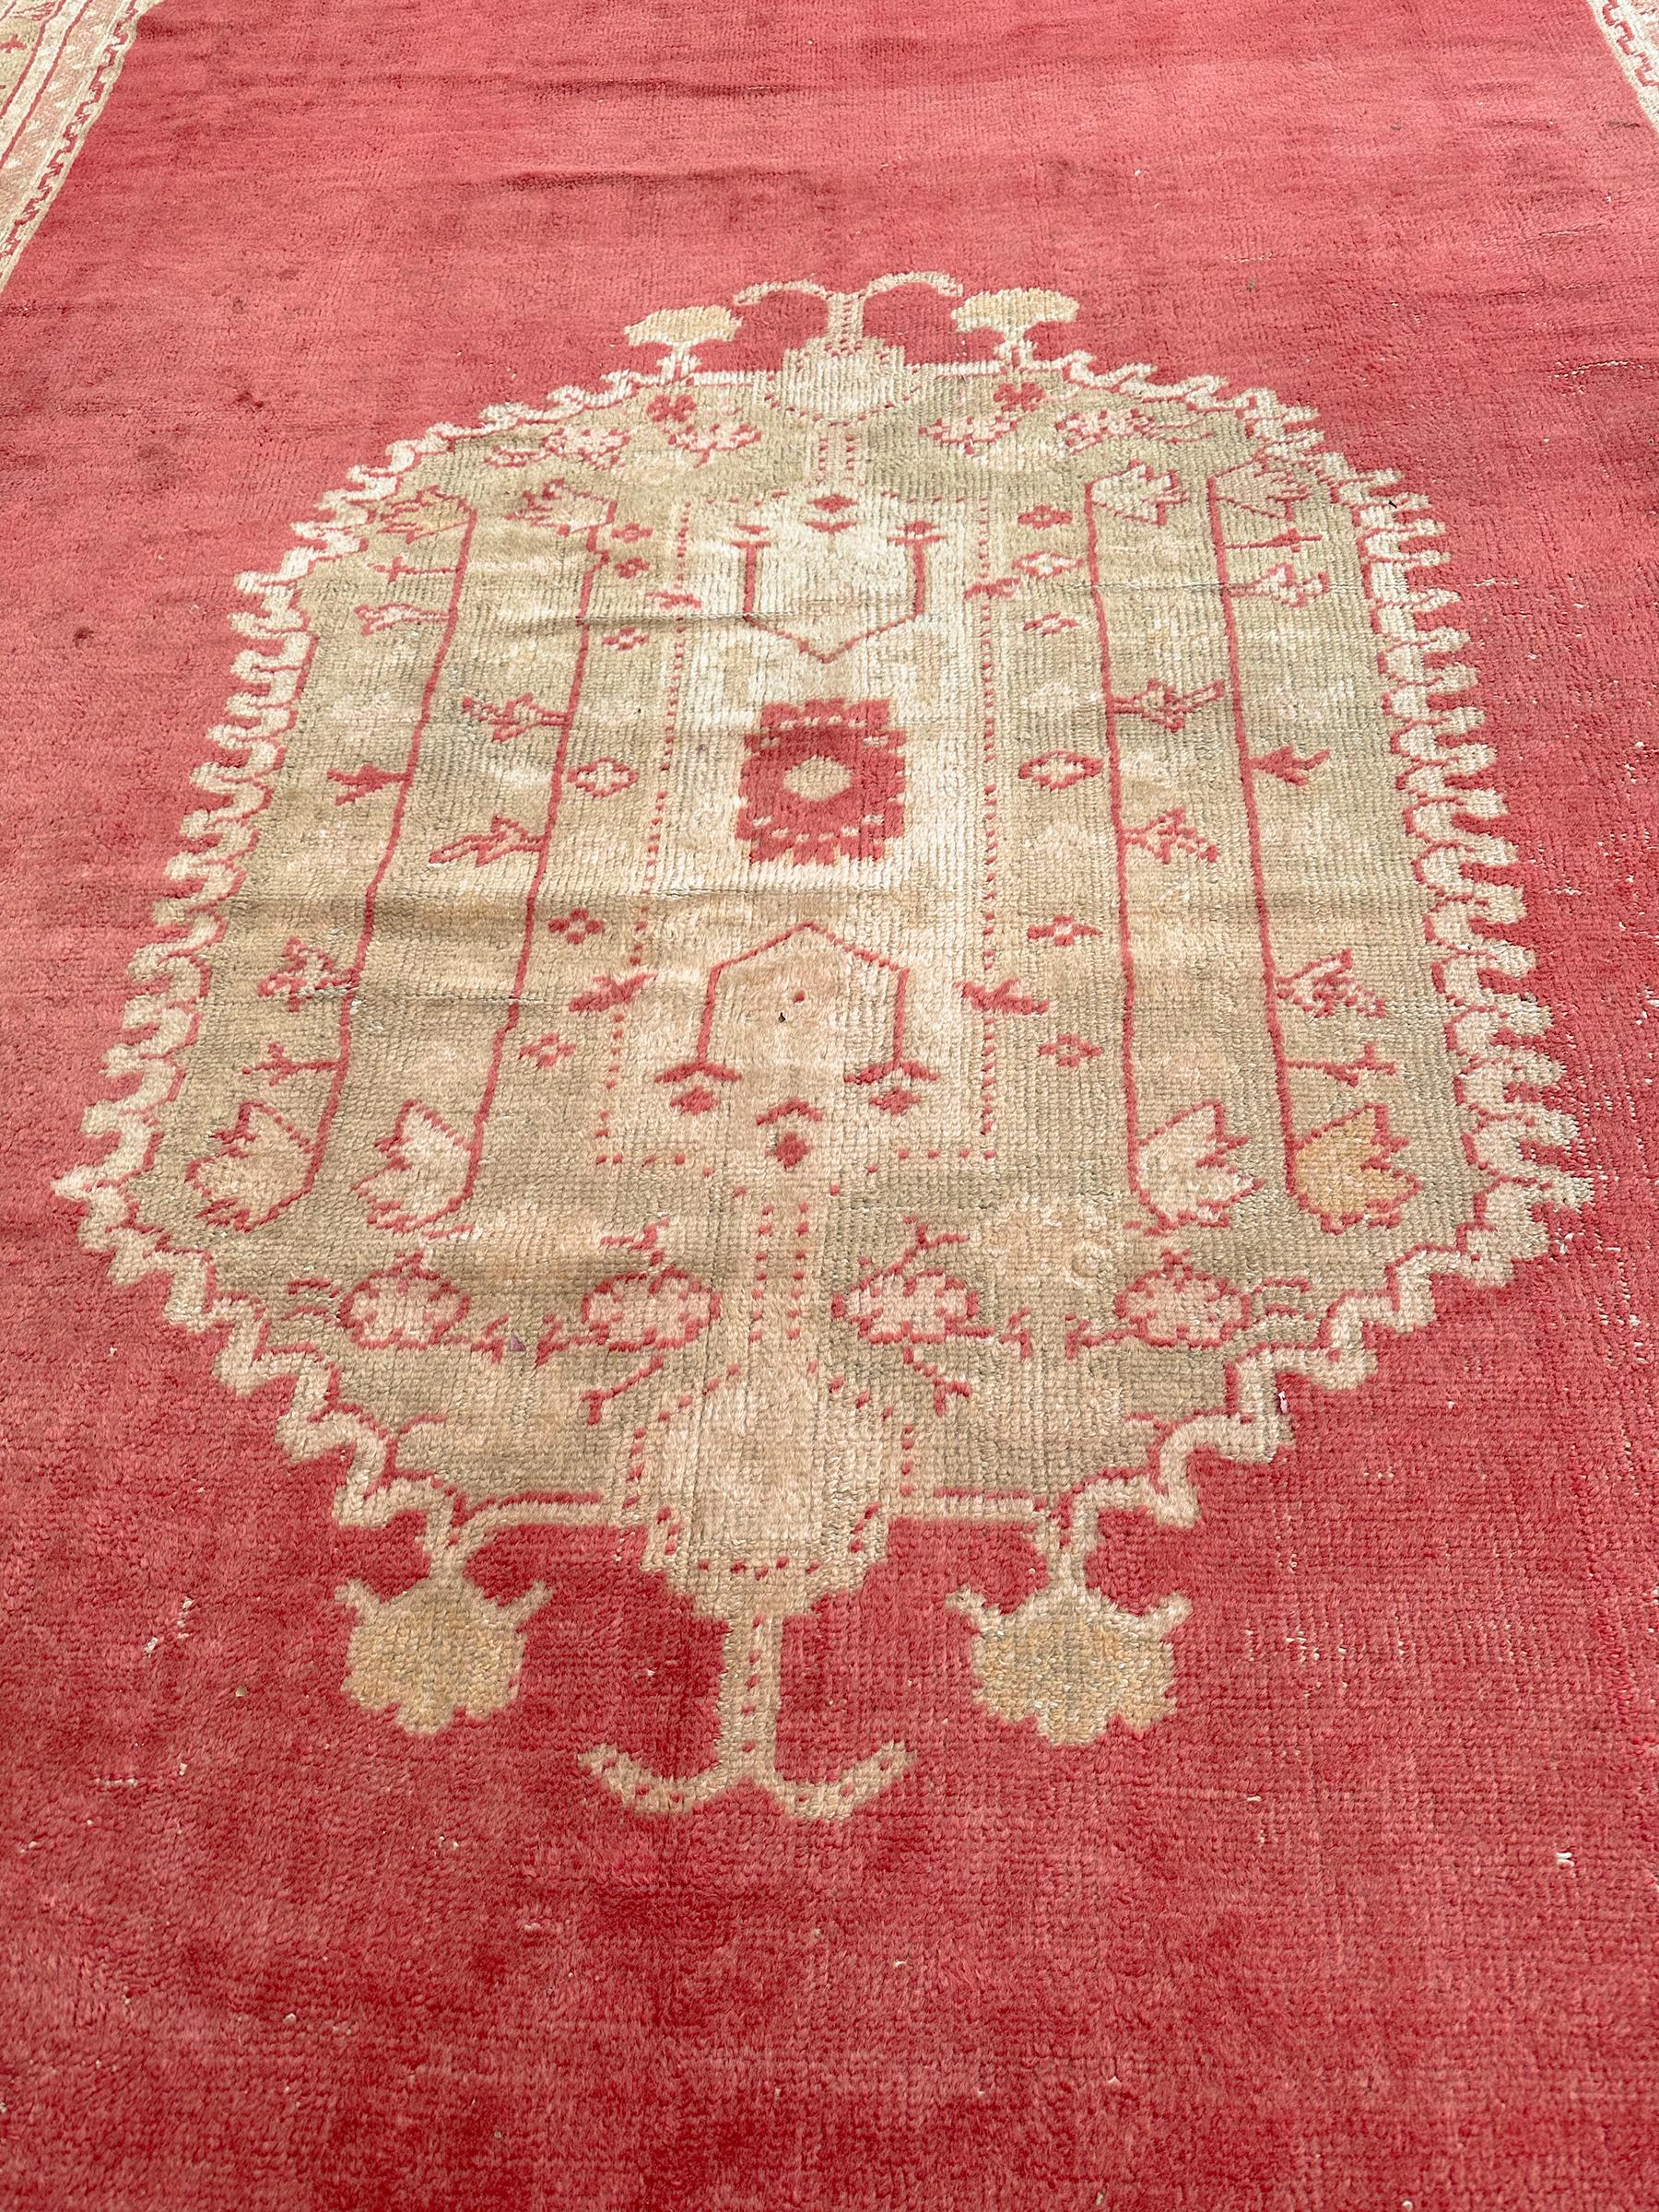 Early 20th Century Authentic Antique Oushak Oversized Wool Foundation 1900 10x18 Handmade 305x549cm For Sale